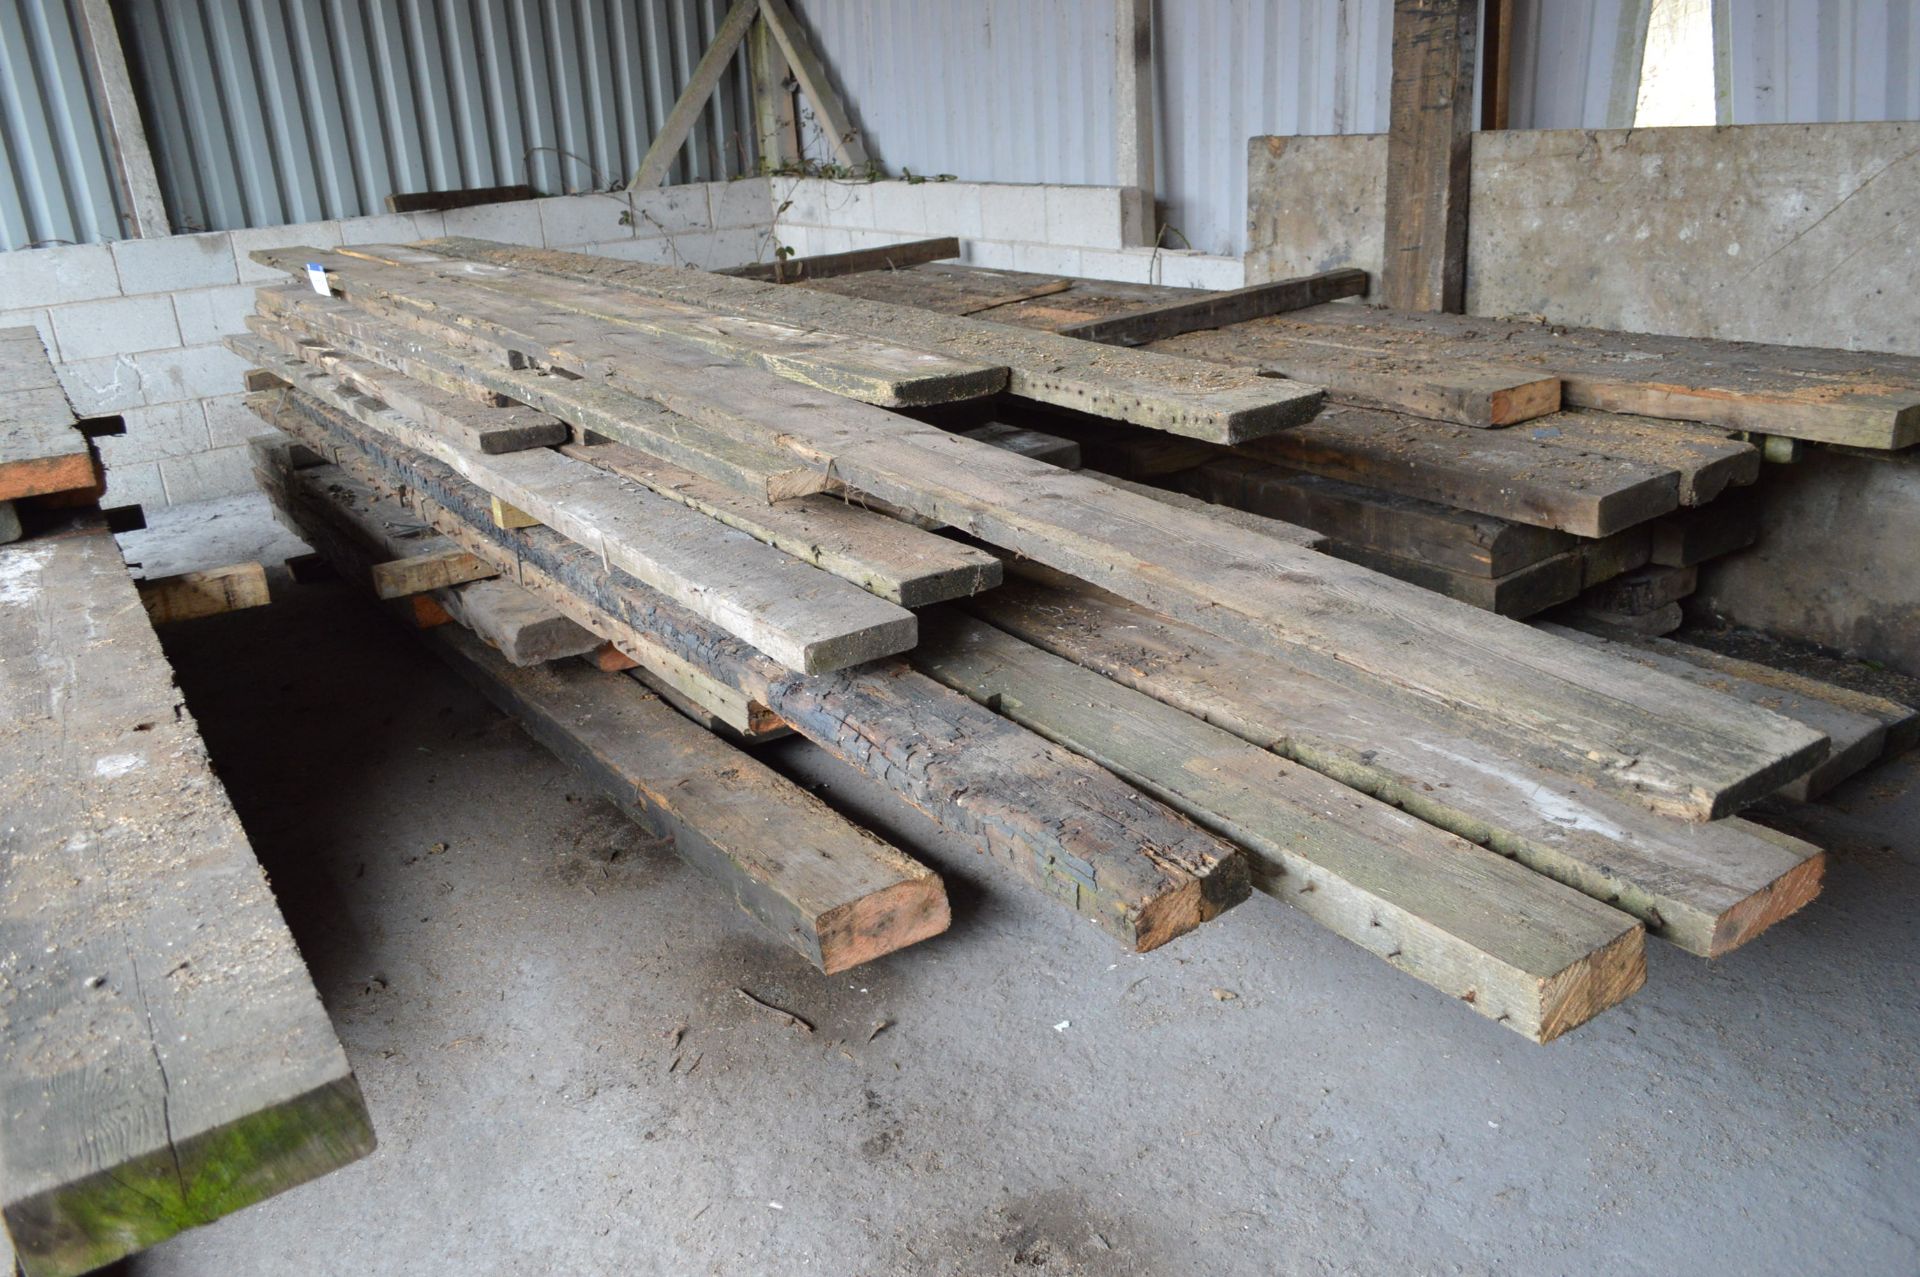 Timber Beams, in one stack